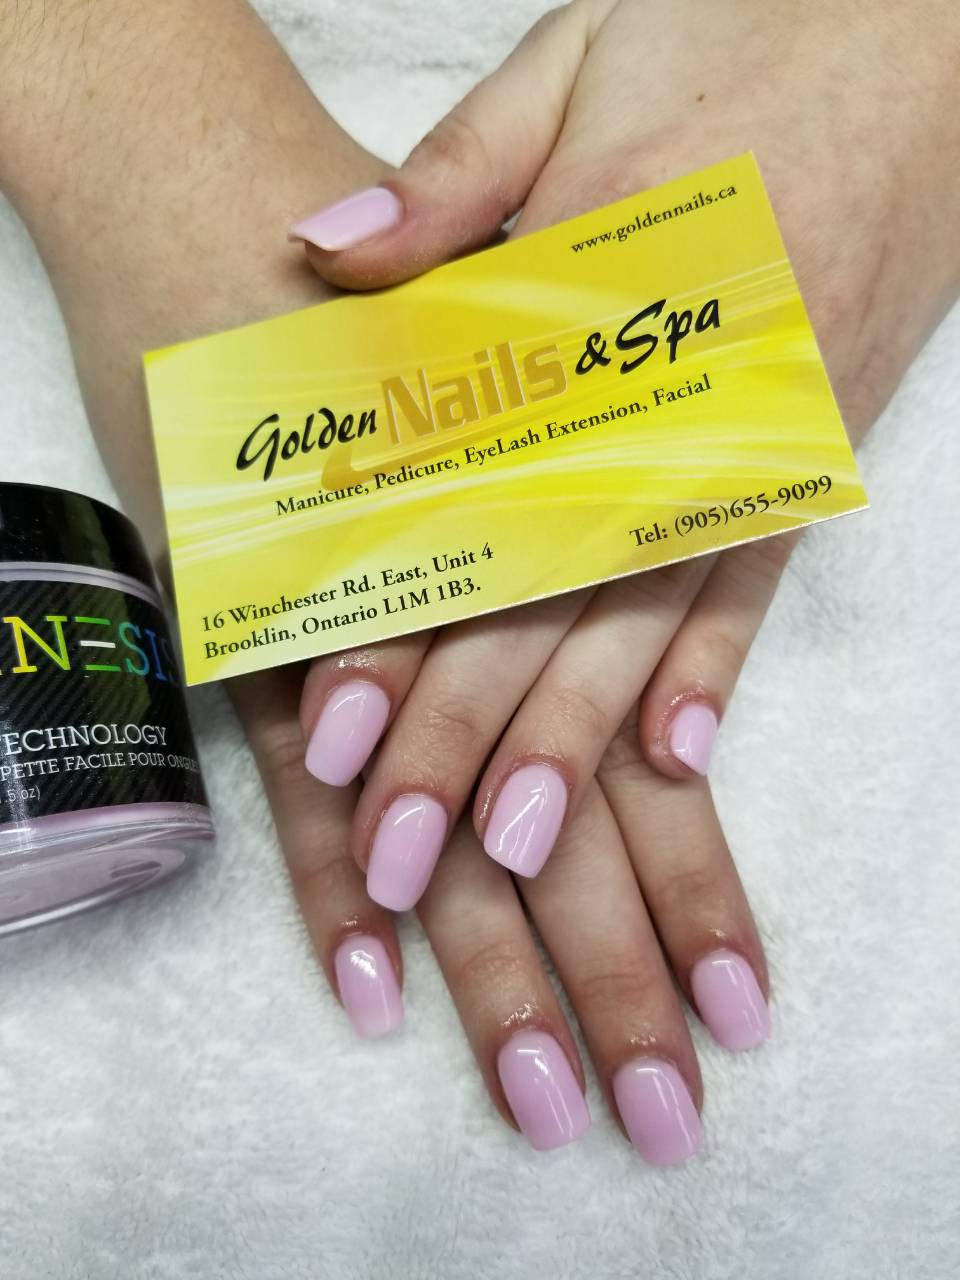 Golden Nails and Spa | 16 Winchester Rd E #4, Whitby, ON L1M 1B3, Canada | Phone: (905) 655-9099